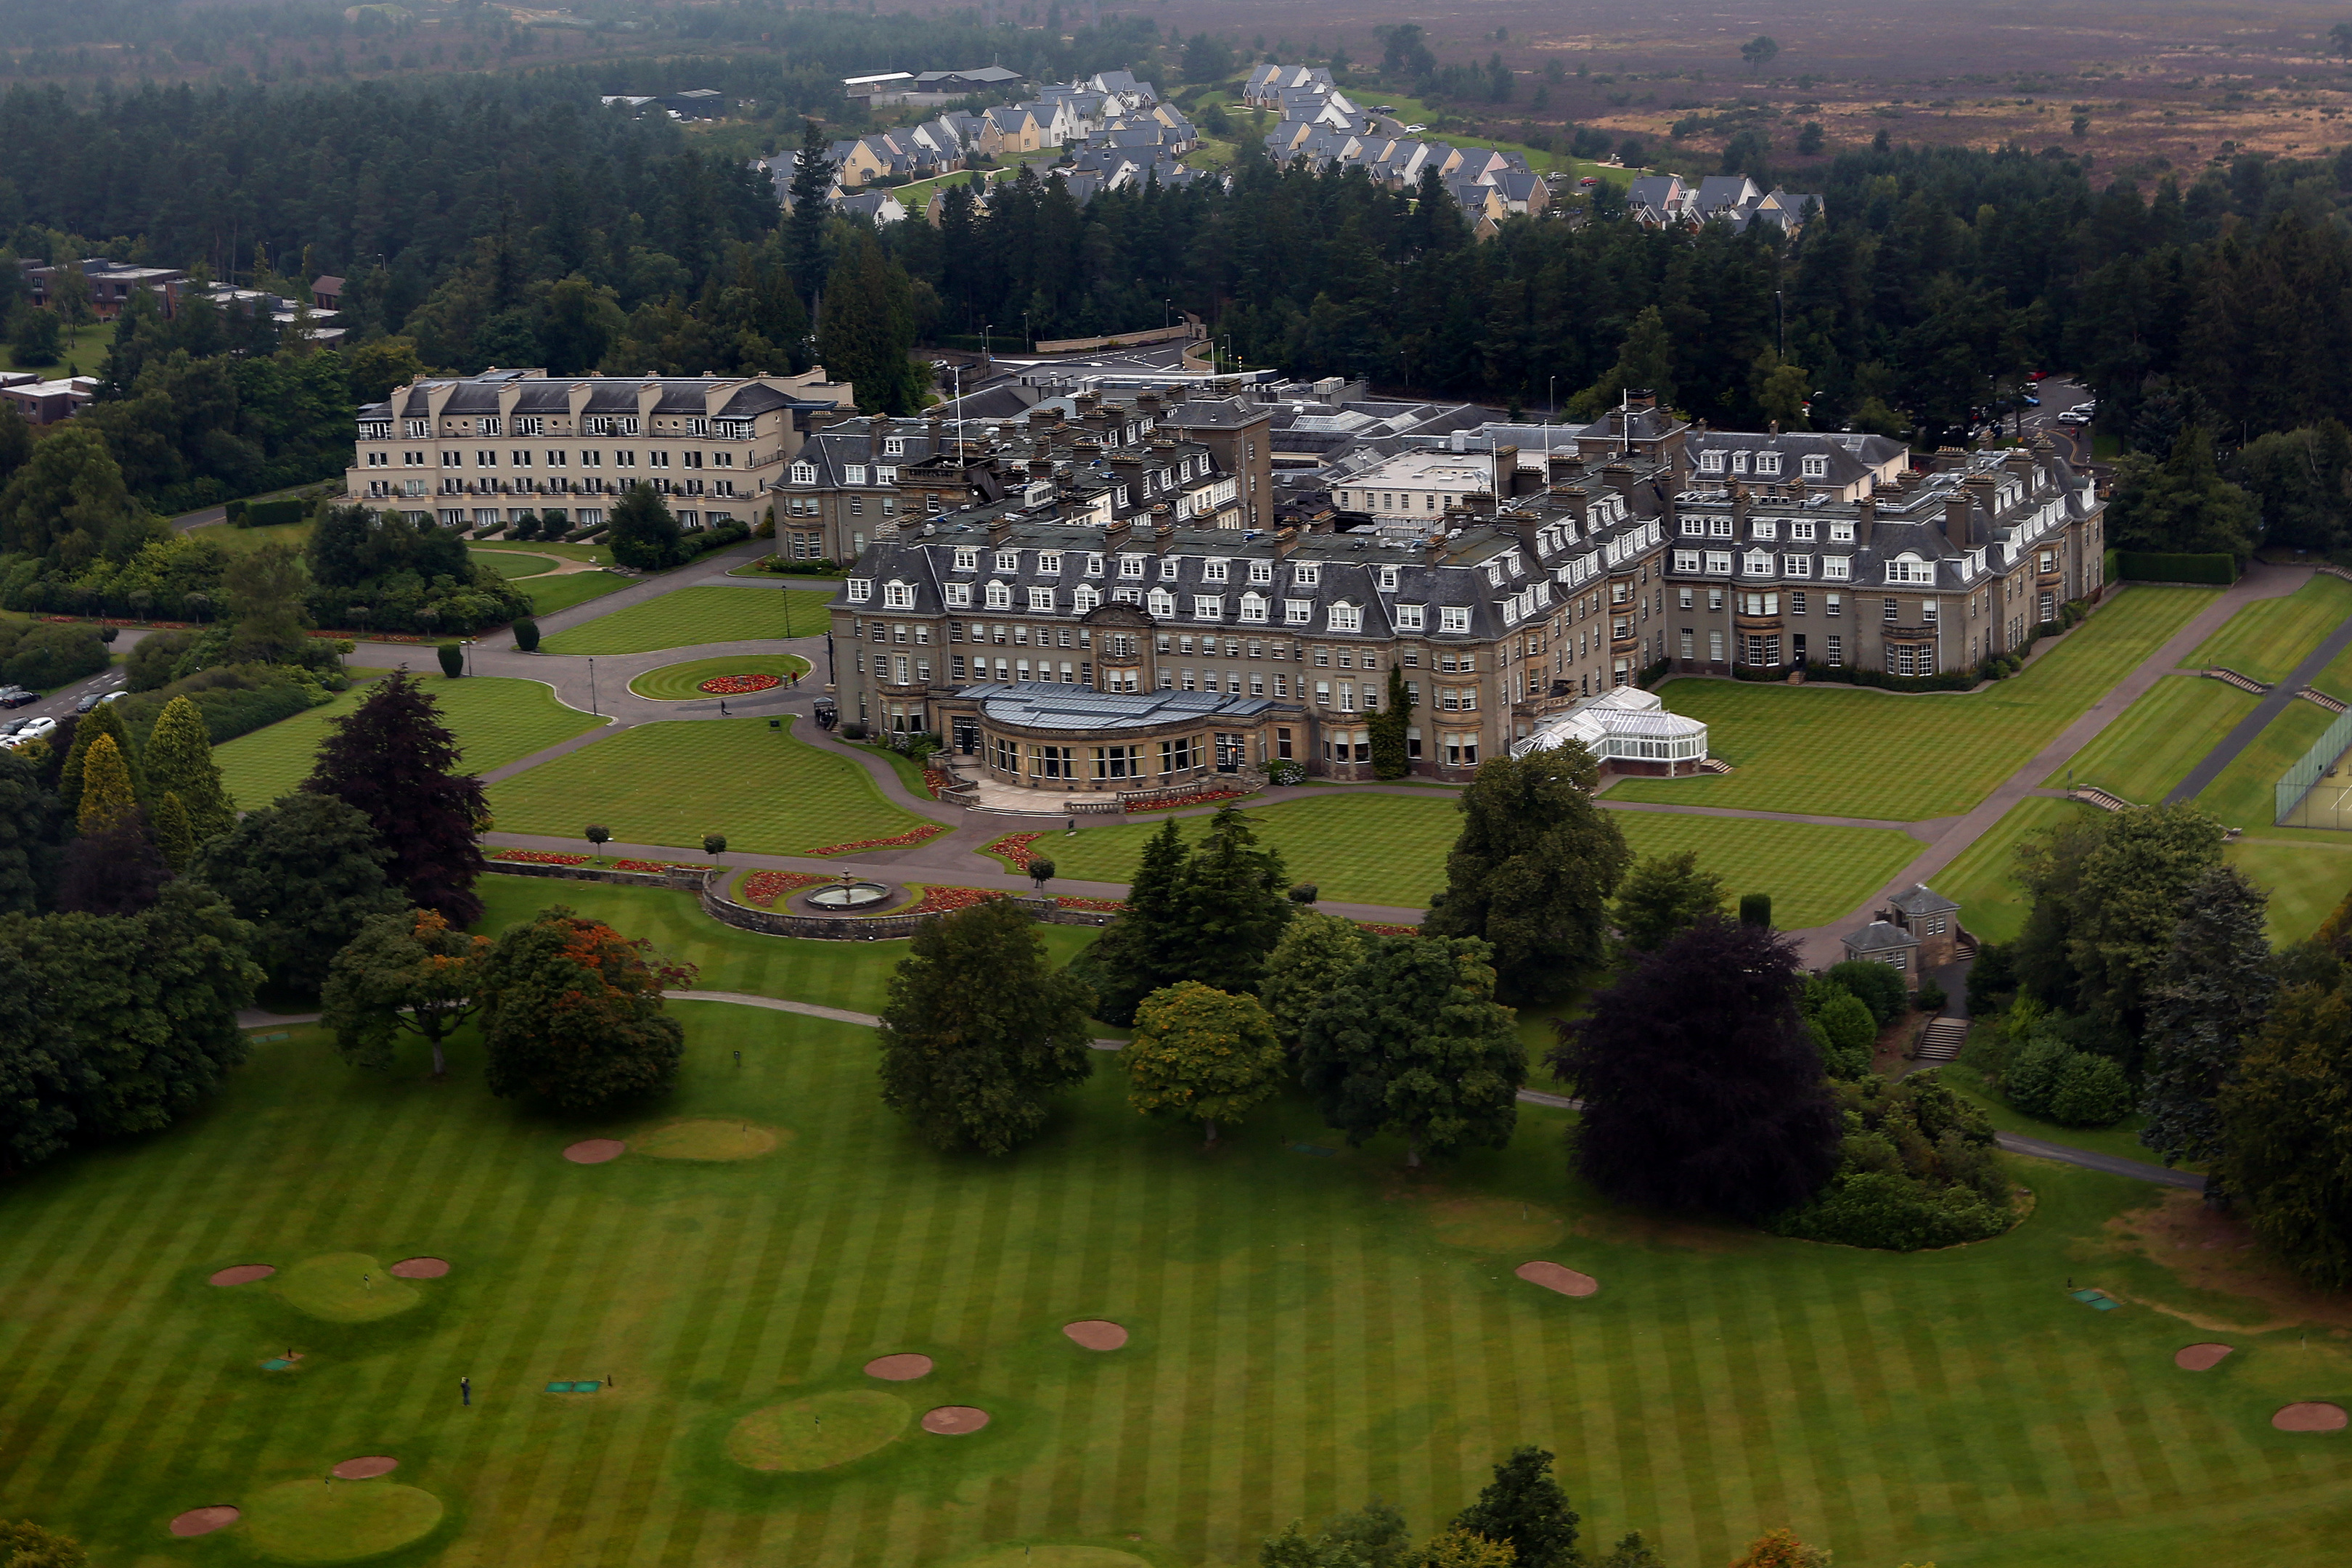 Top team golf returns to Gleneagles in August at the European Team Championships.